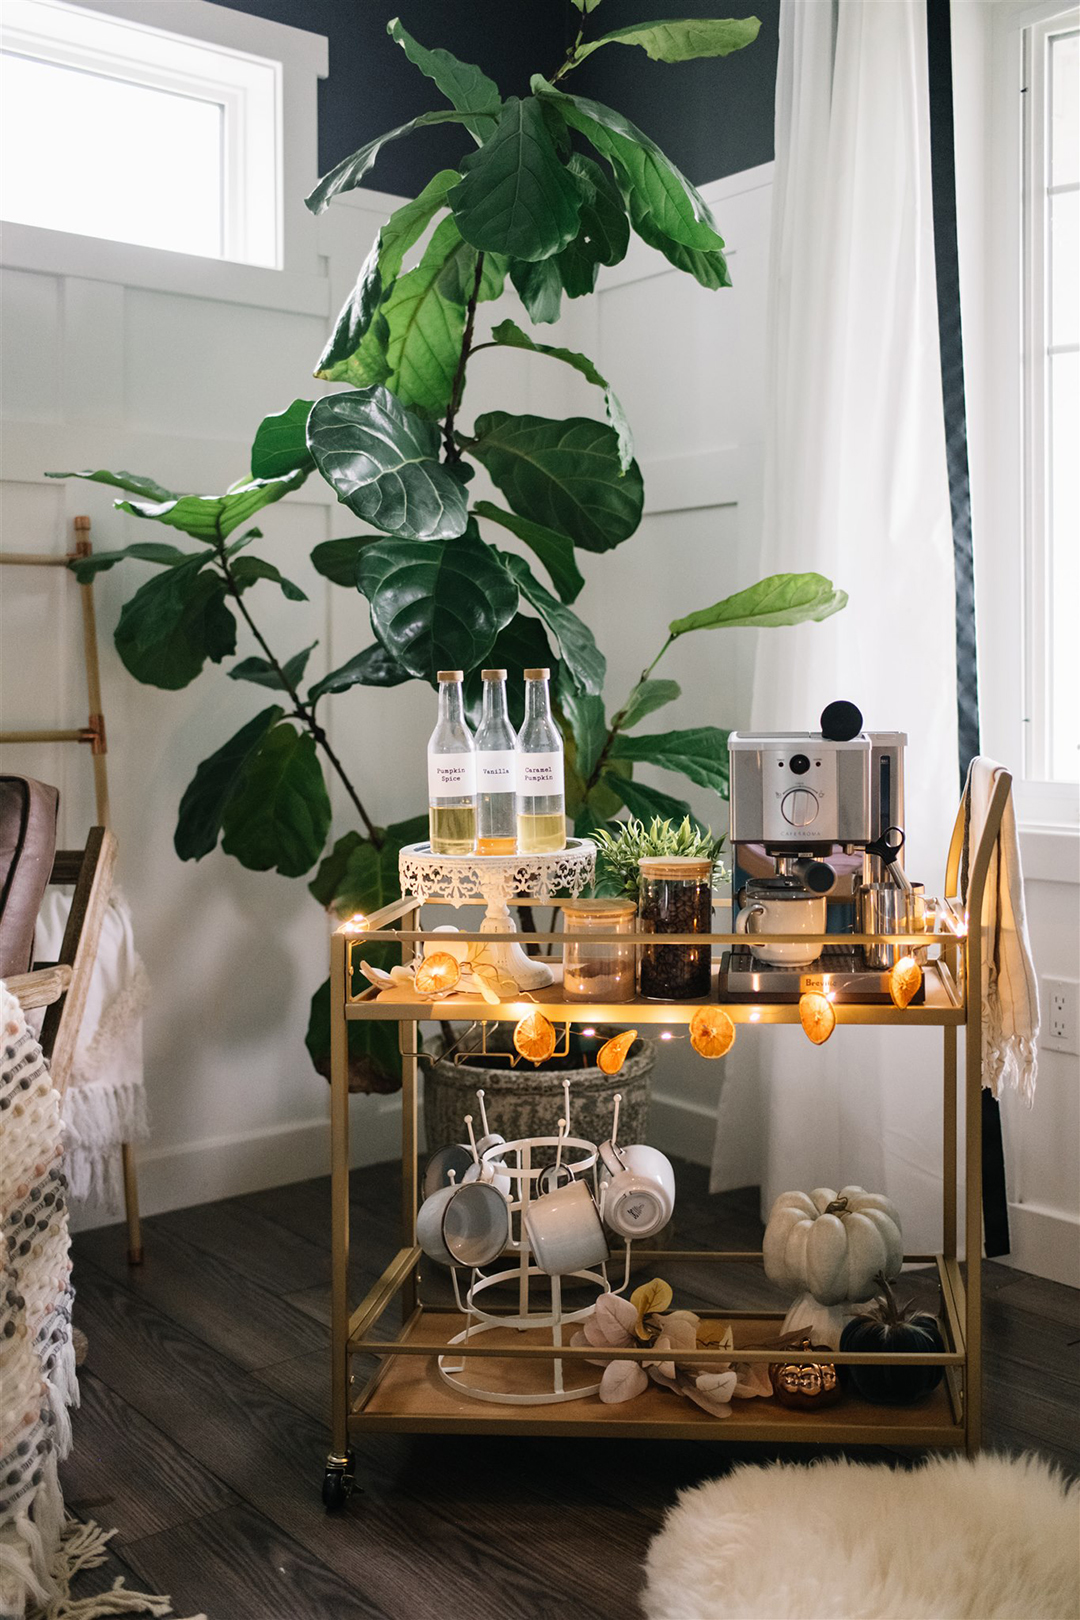 How to make a coffee station at home with an Amazon bar cart